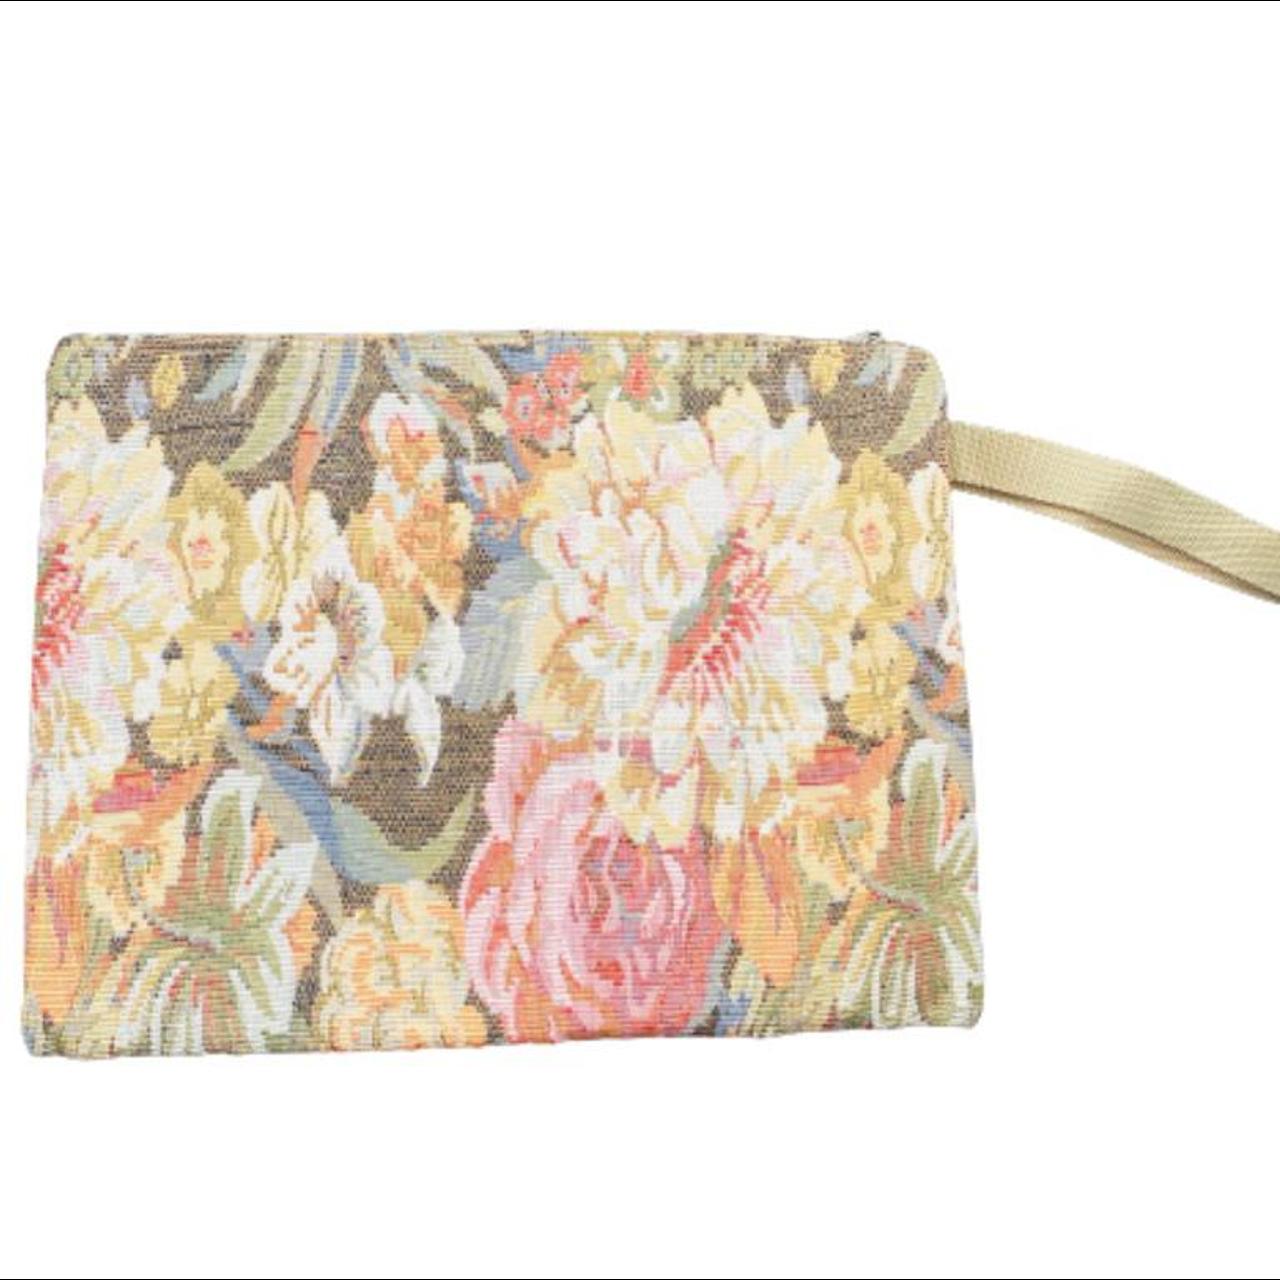 Product Image 2 - Adolfo floral zipper bag

- Made